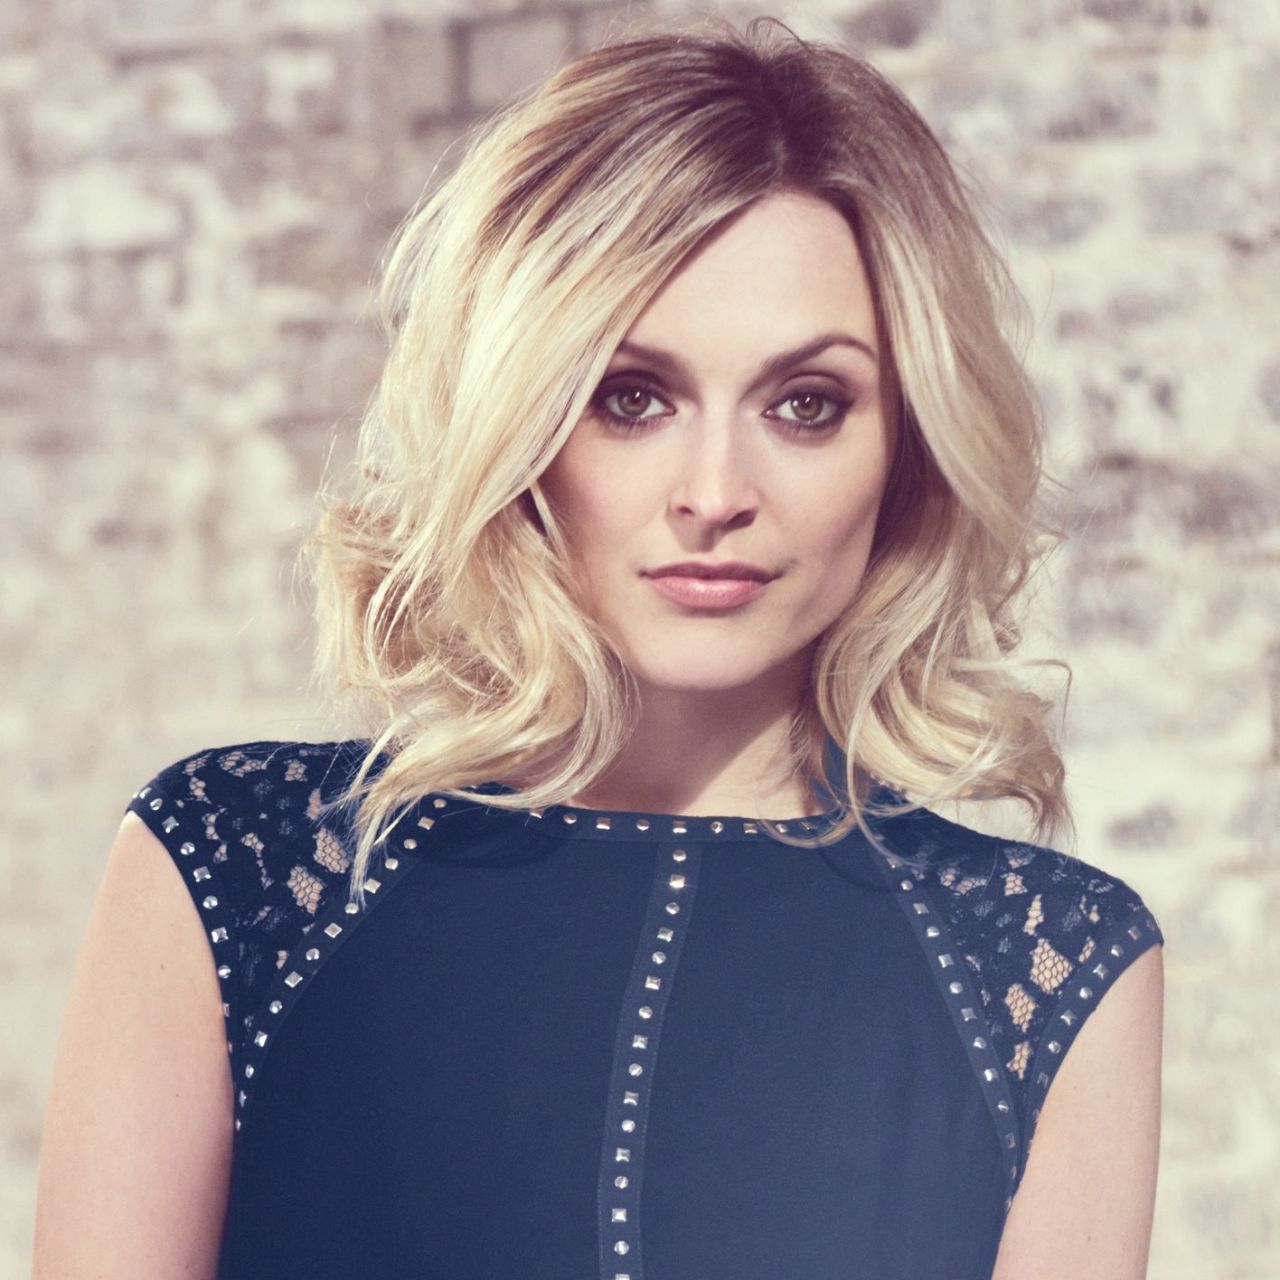 square_nrm_1424446947-fearne_cotton_ss15_collection_for_verycouk_3_embargoed_until_23rd_february_2015.jpg